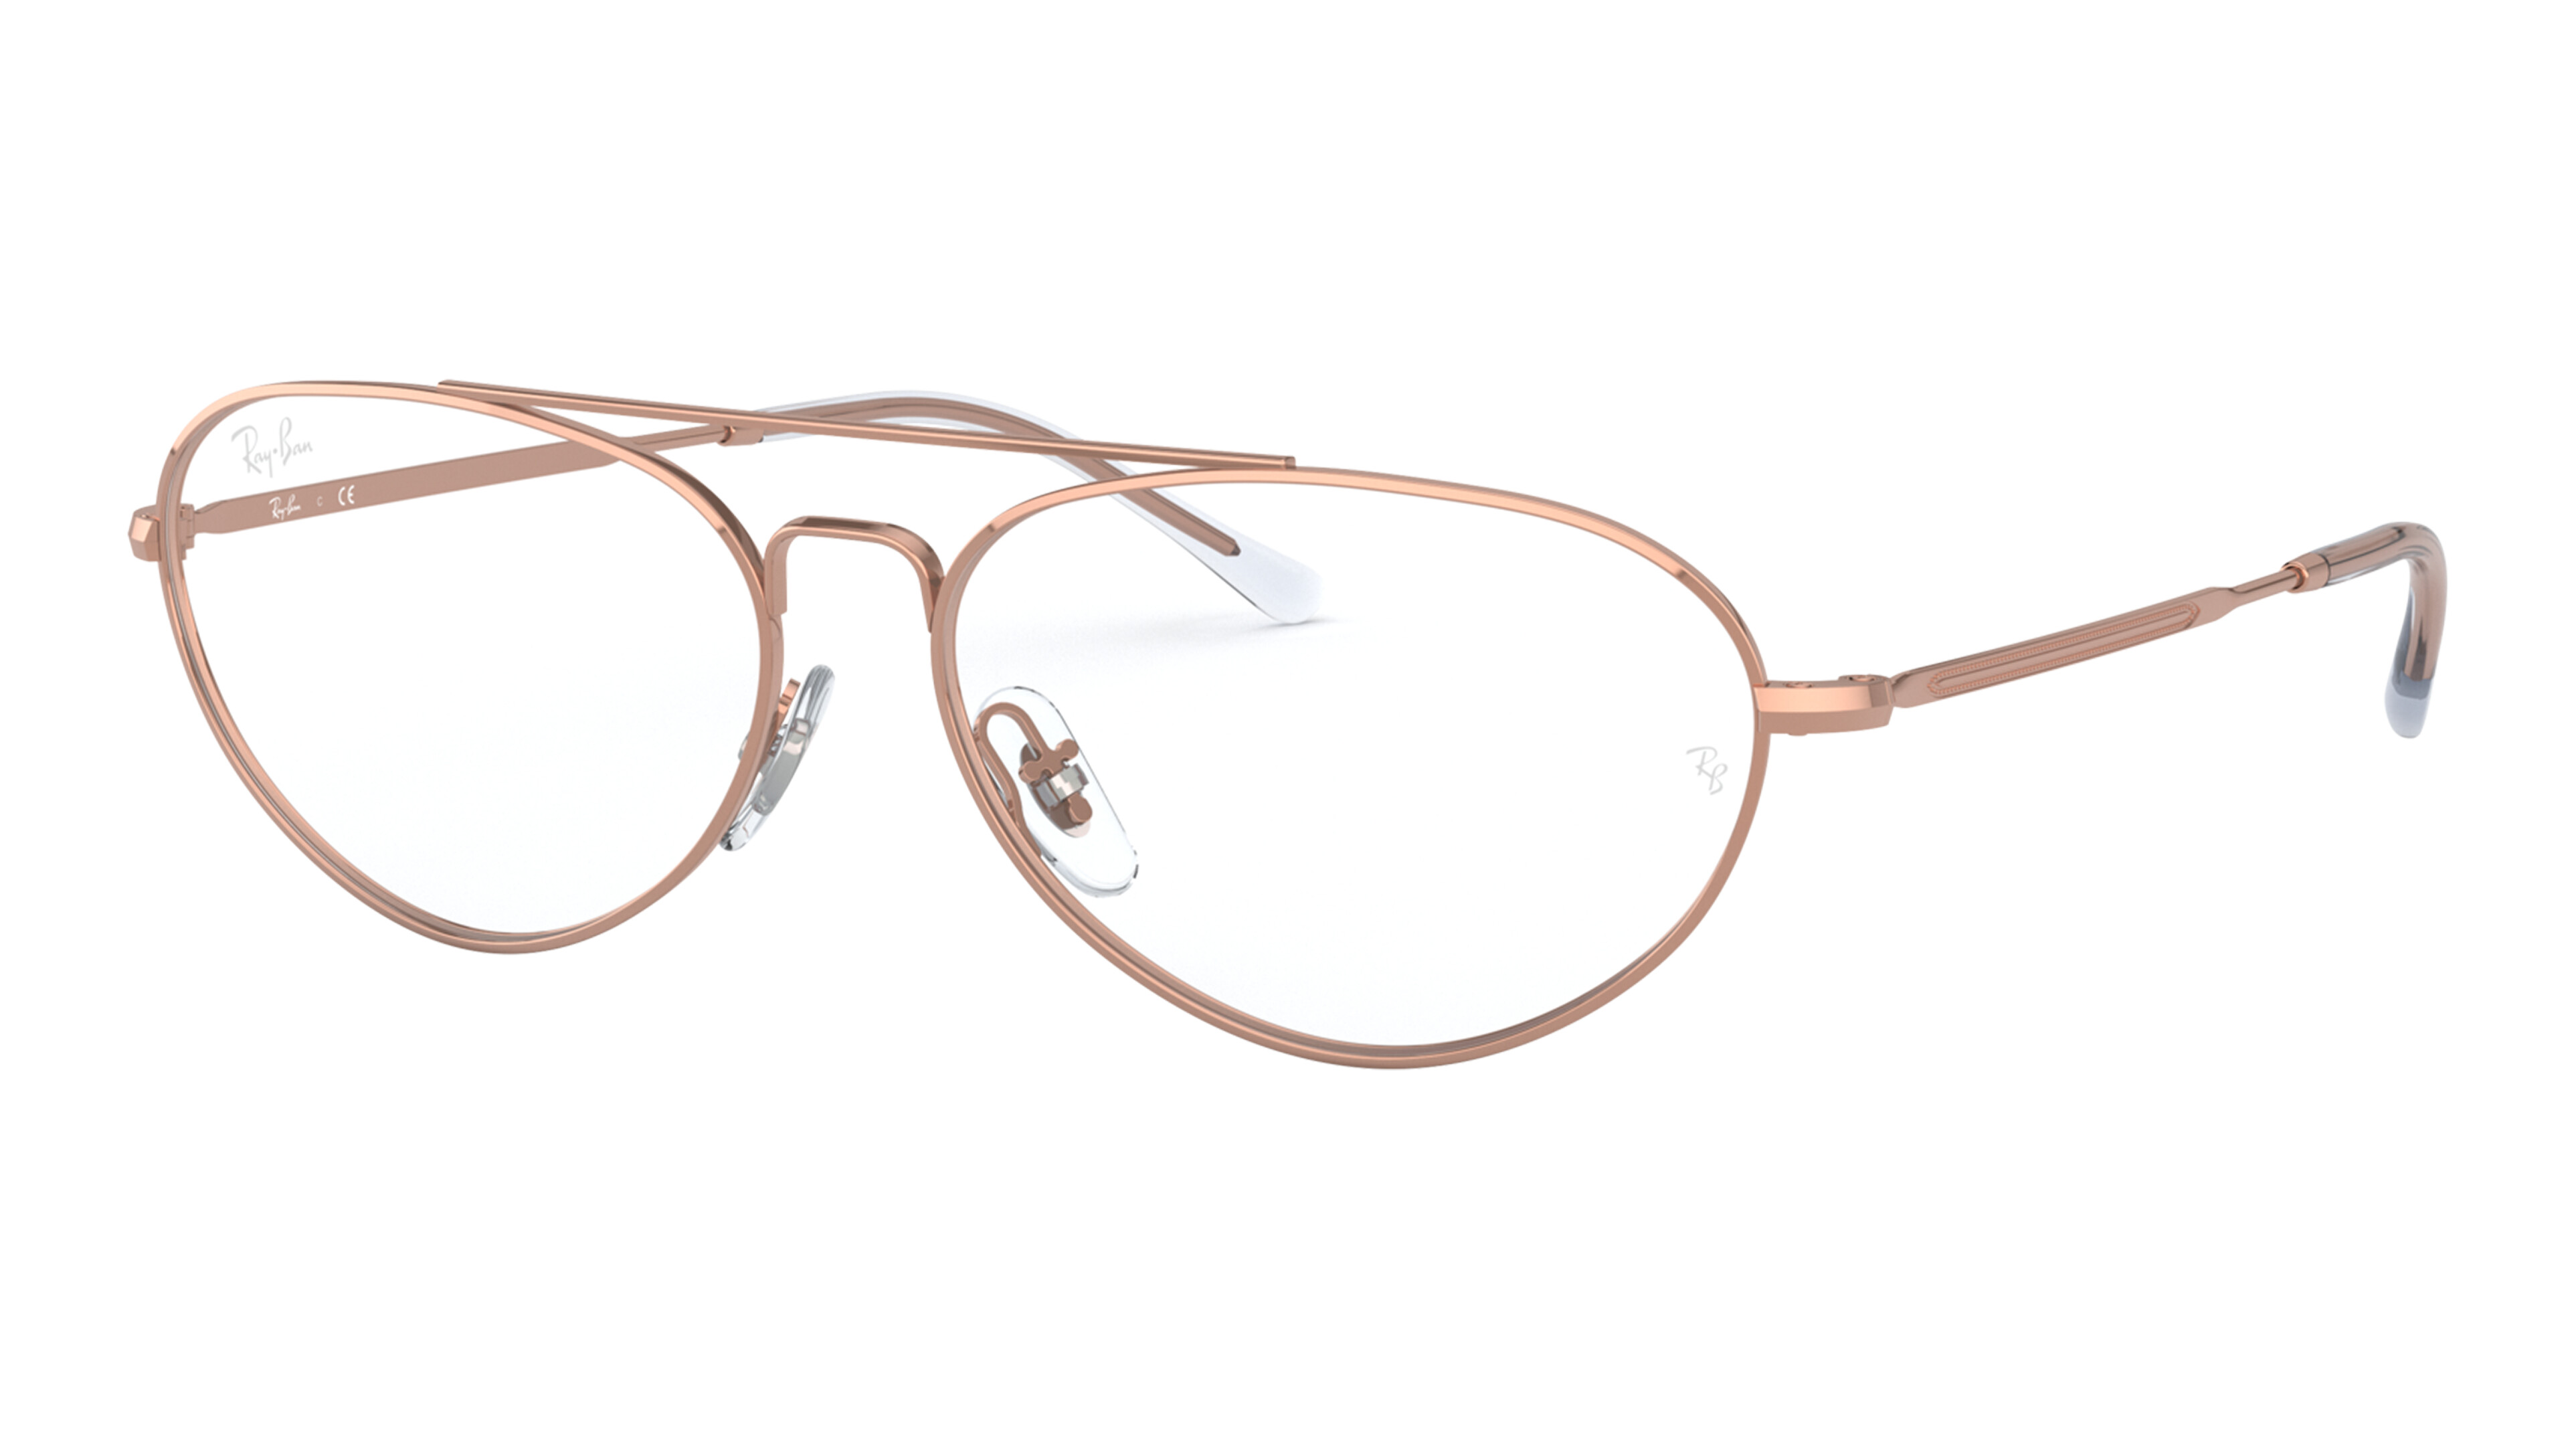 Angle_Left01 Ray-Ban OPTICS 0RX6454 3094 Brille Pink Gold